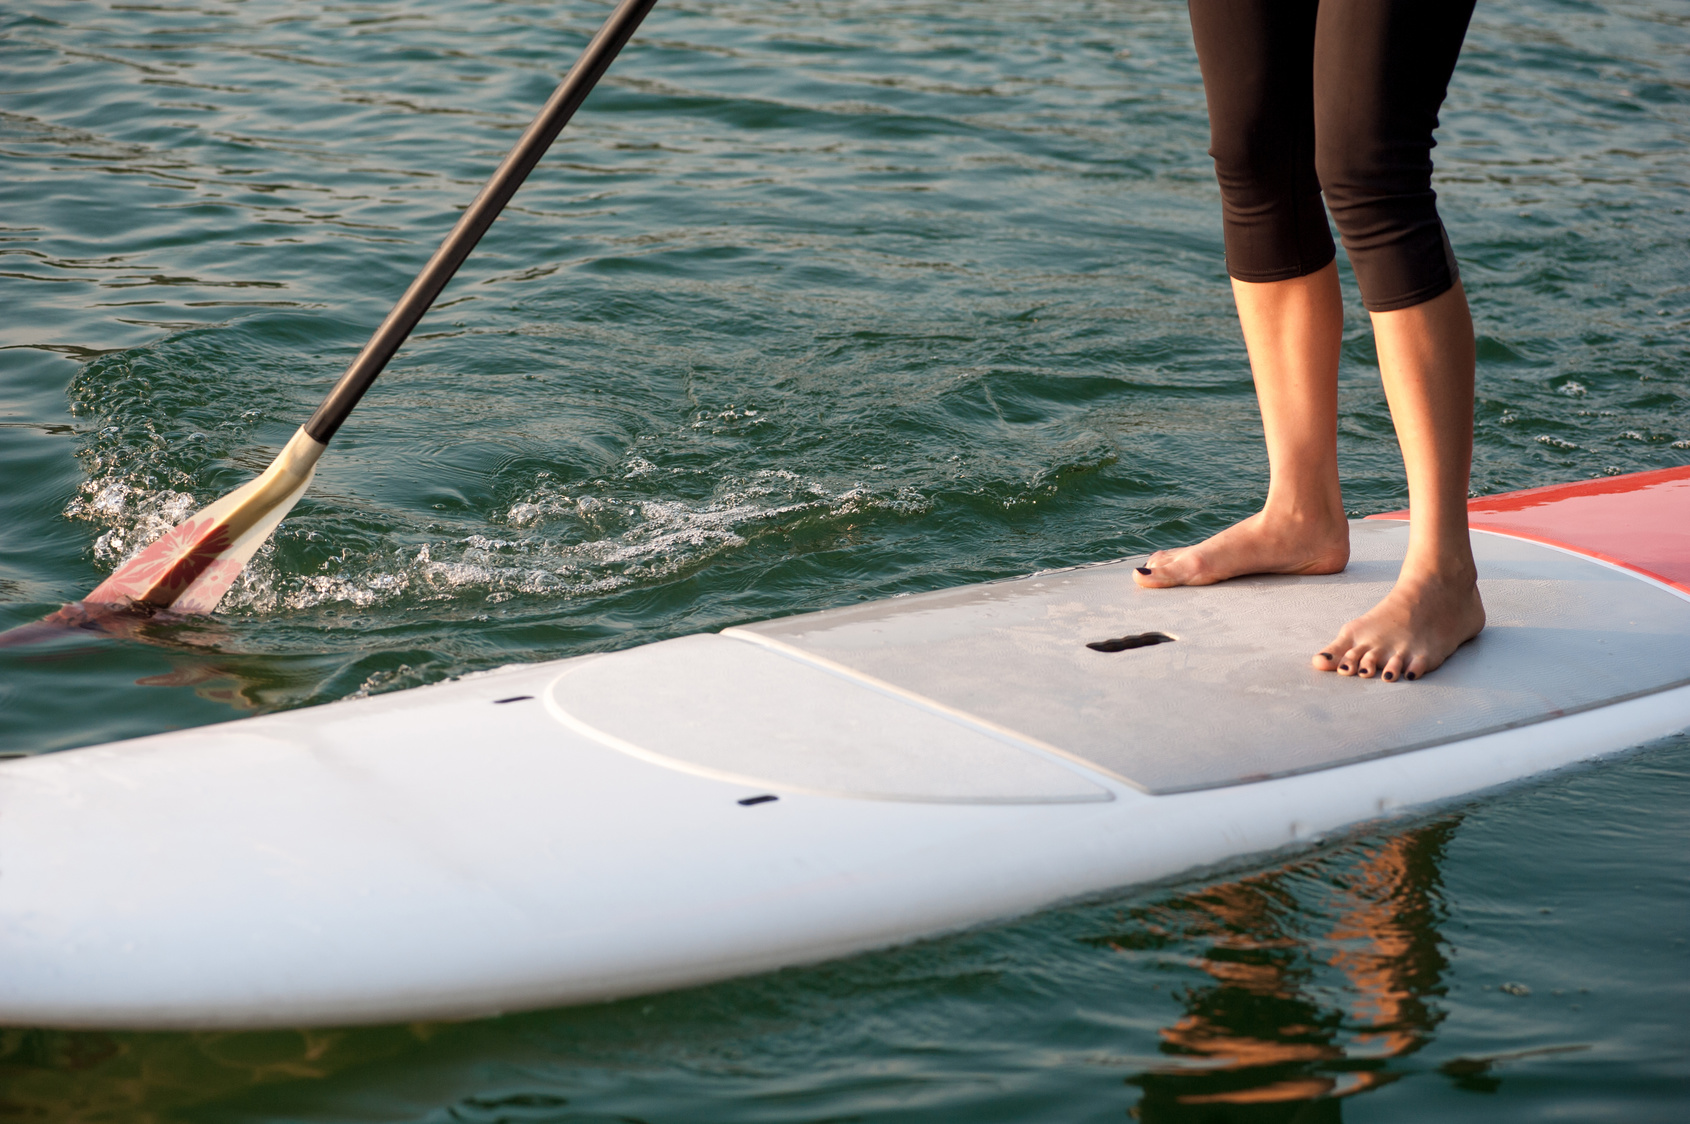 How to Paddle Board: 7 Tips for Beginners